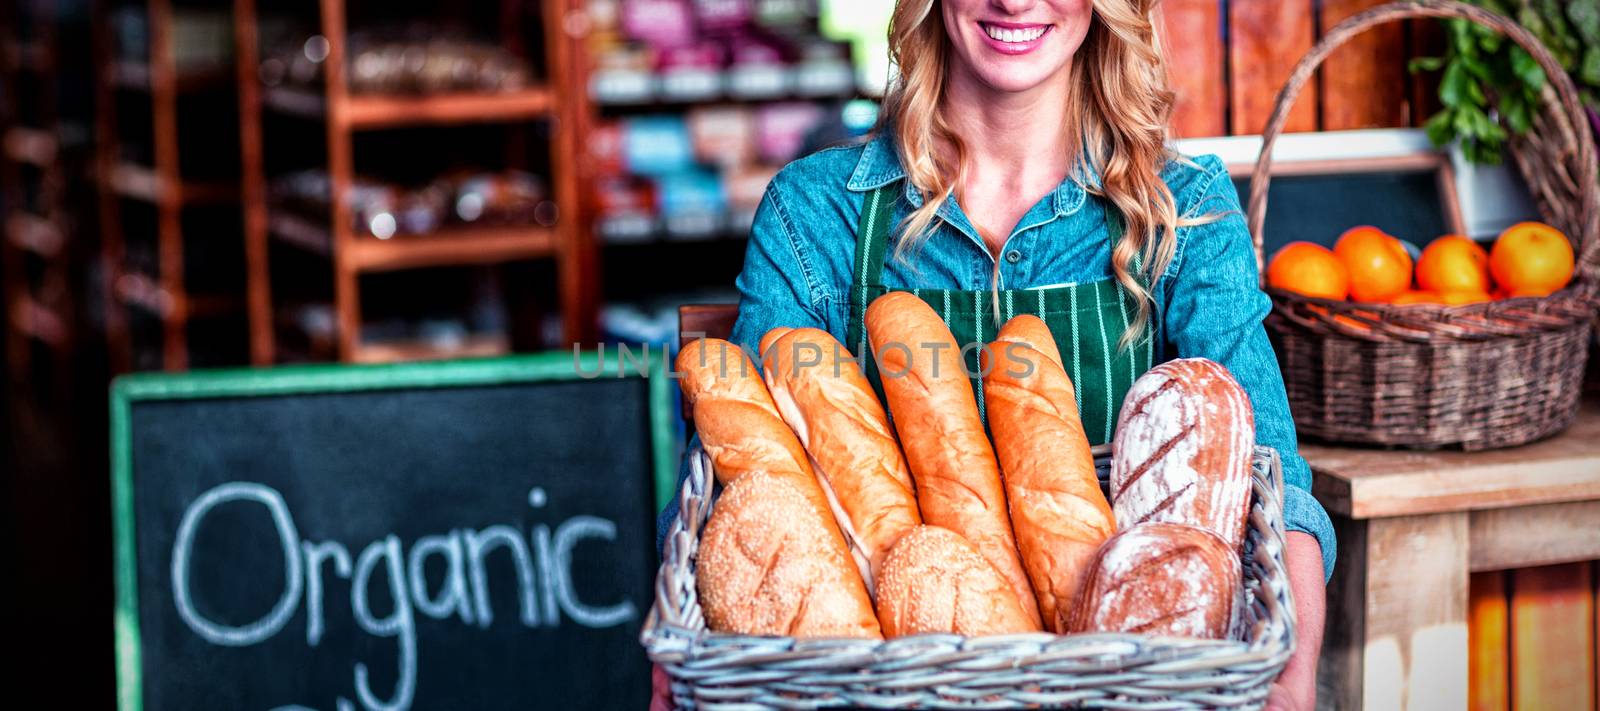 Smiling woman holding a basket of baguettes in organic shop by Wavebreakmedia